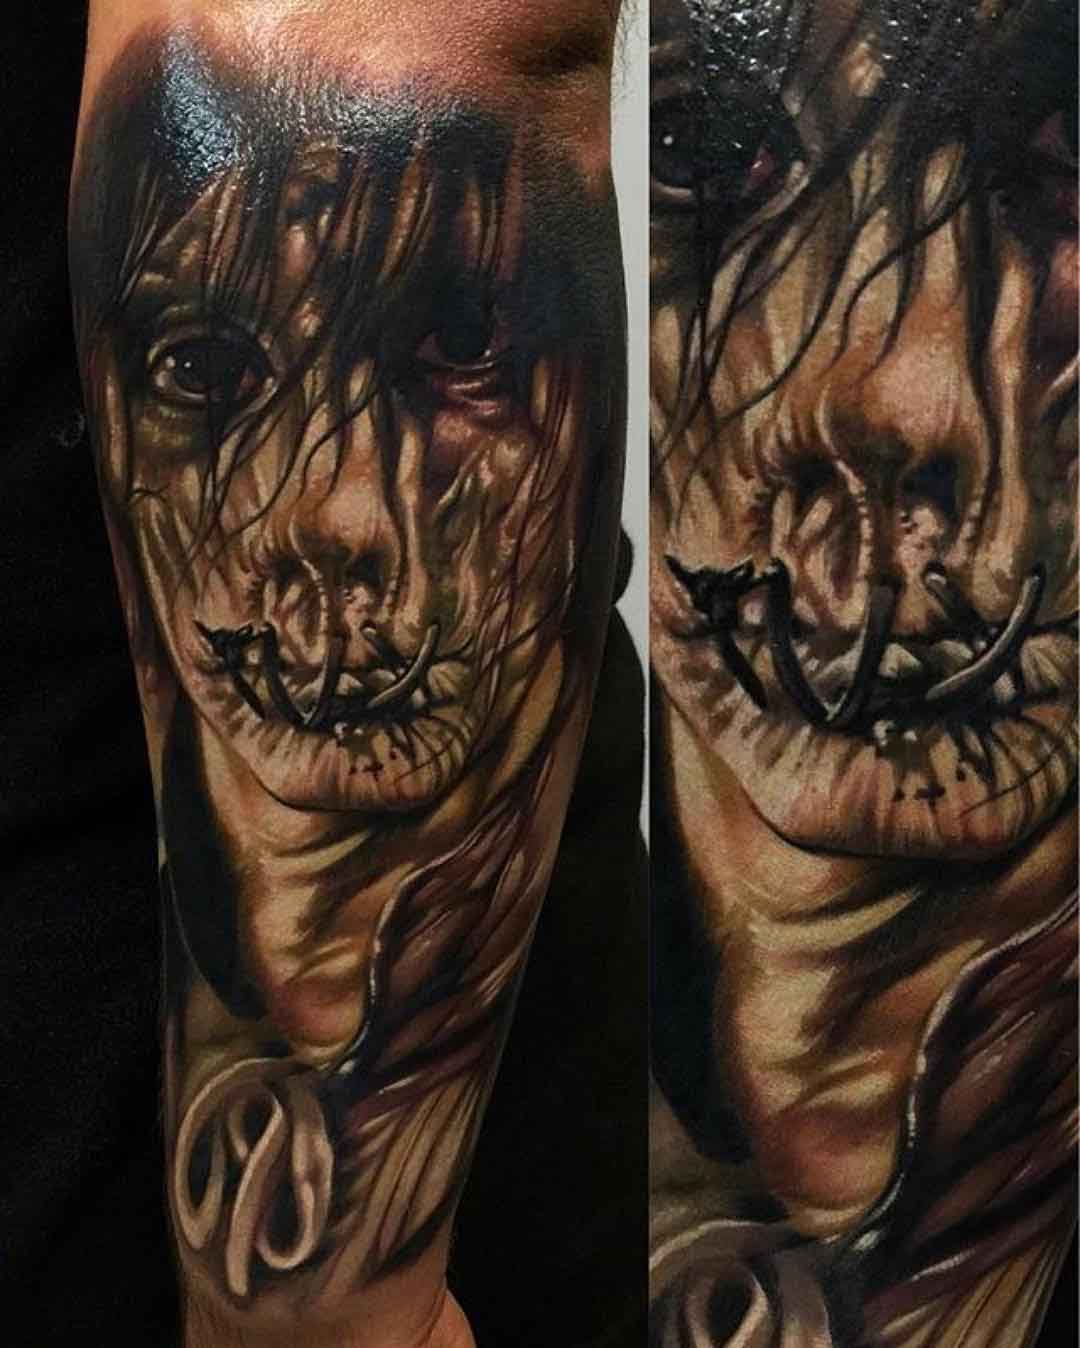 sawed mouth tattoo horror